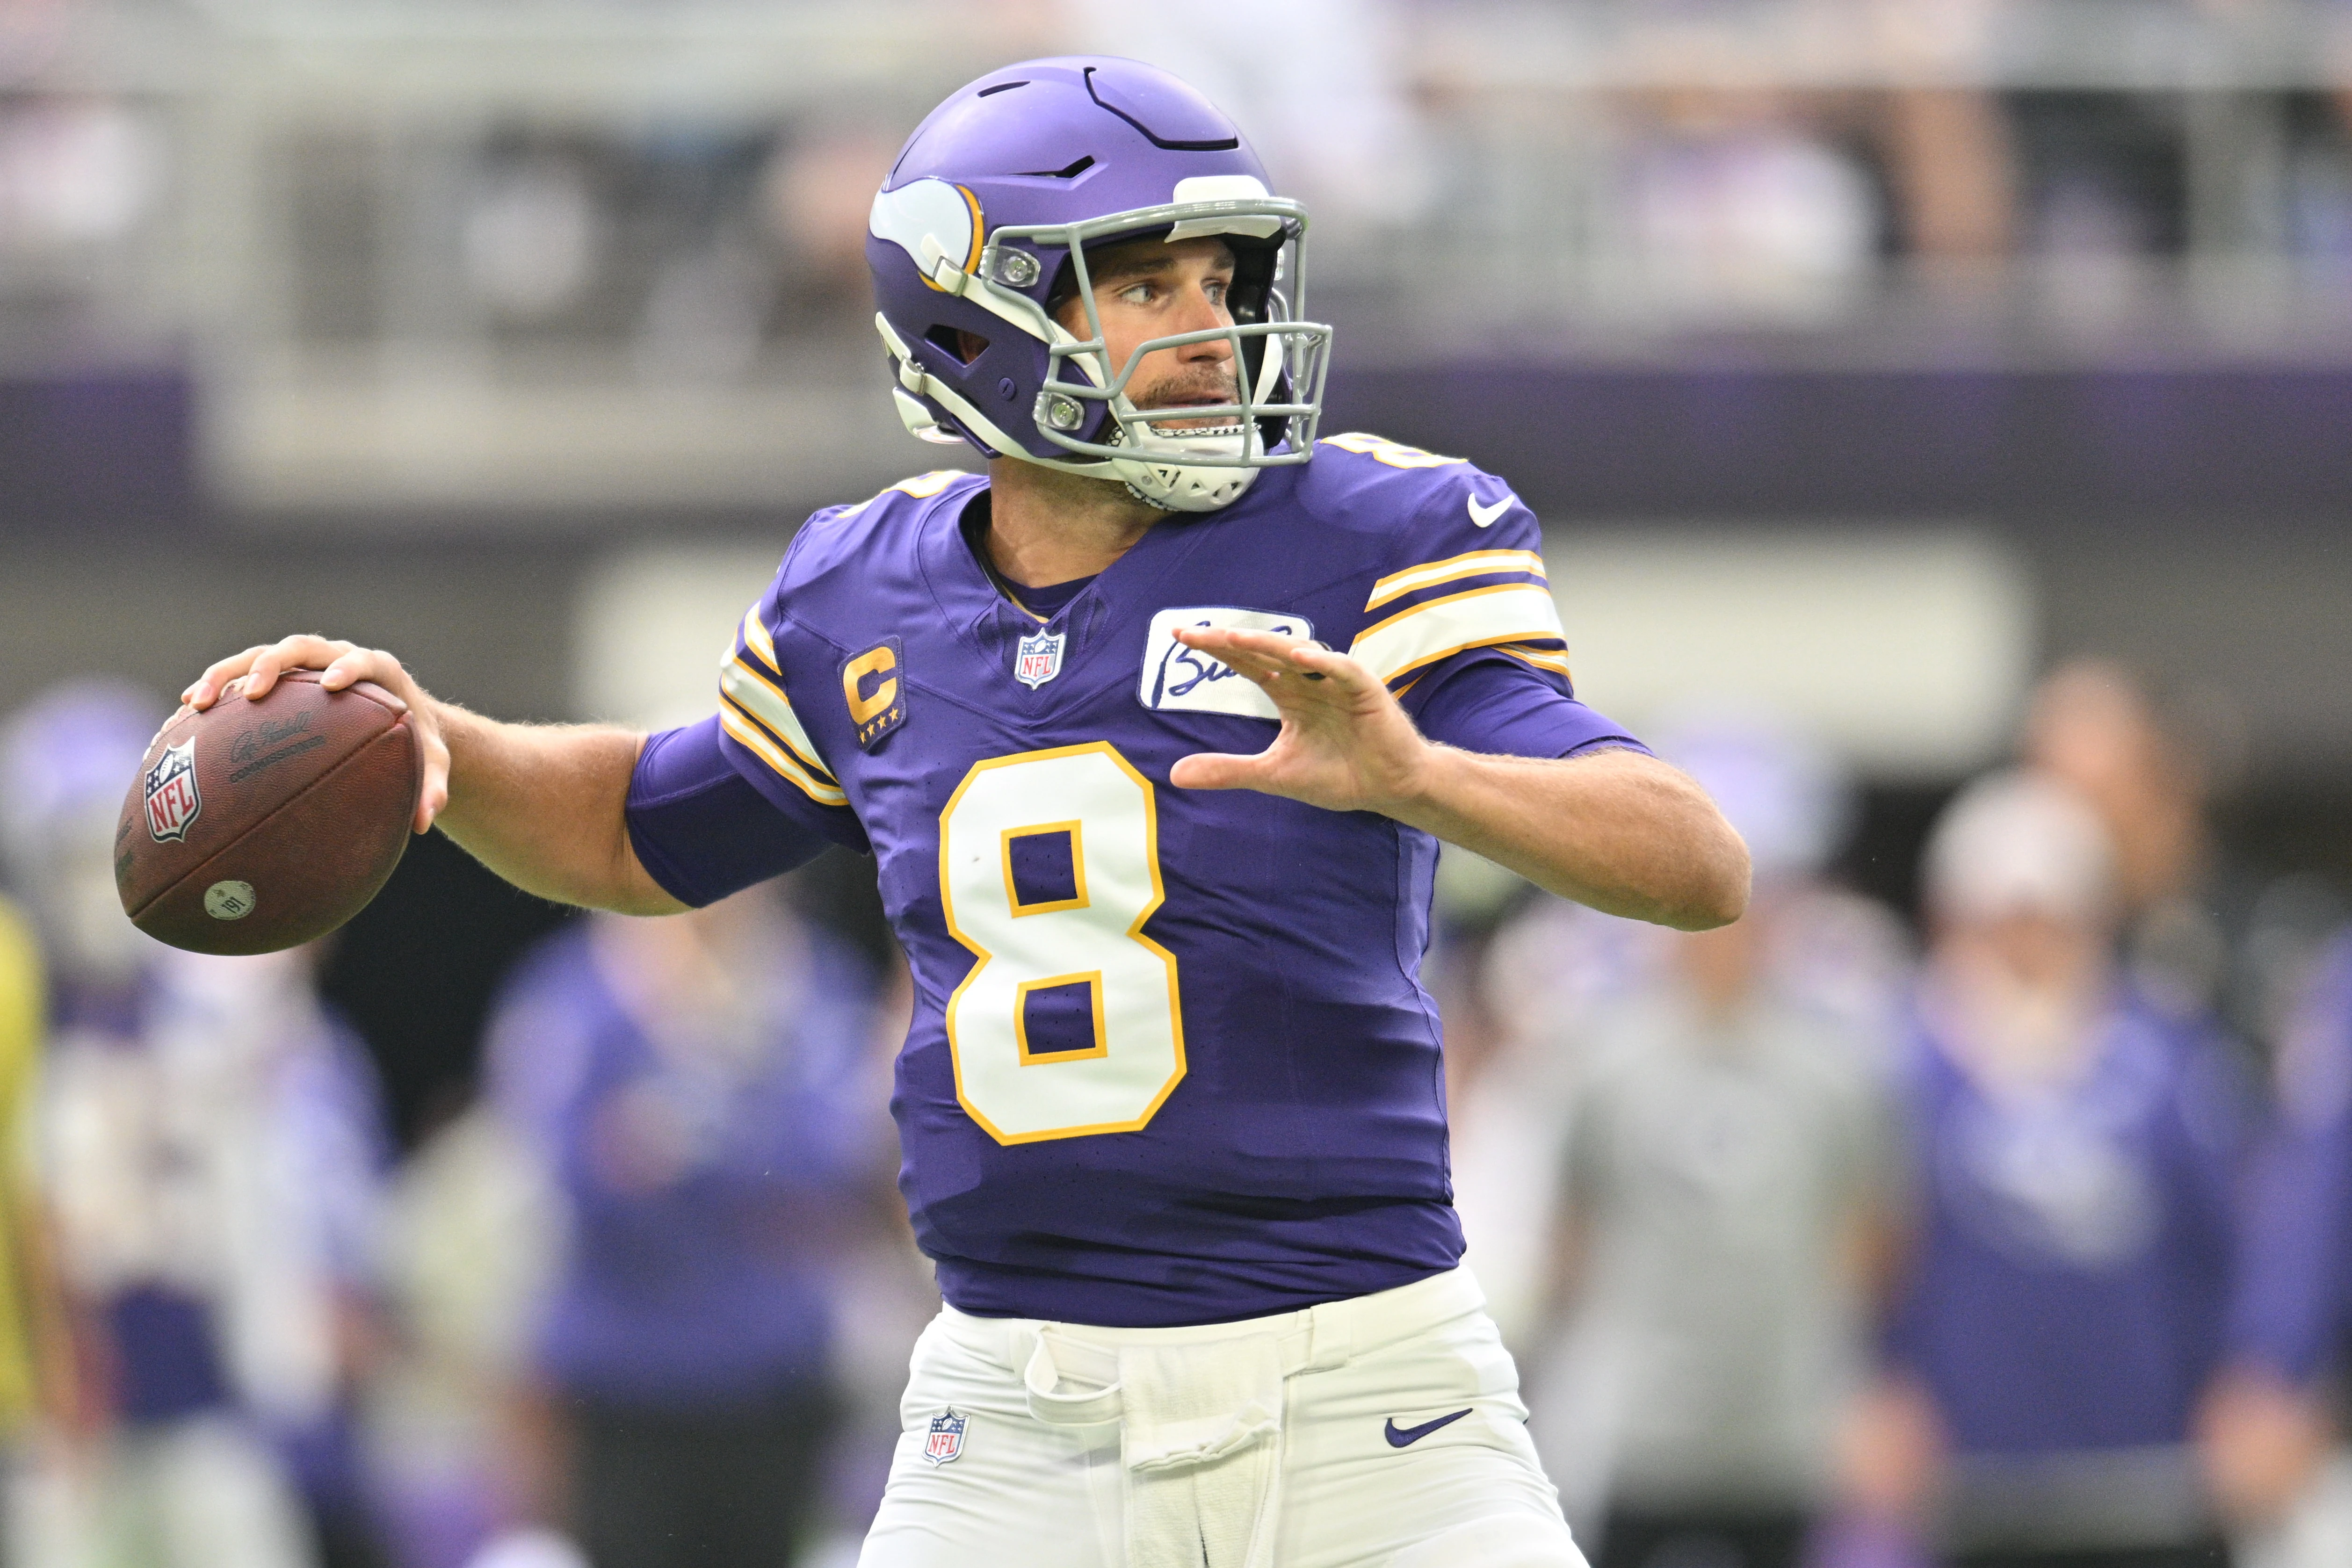 Minnesota Vikings quarterback Kirk Cousins (8) prepares to throw a pass against the Tampa Bay Buccaneers during the first quarter at U.S. Bank Stadium.